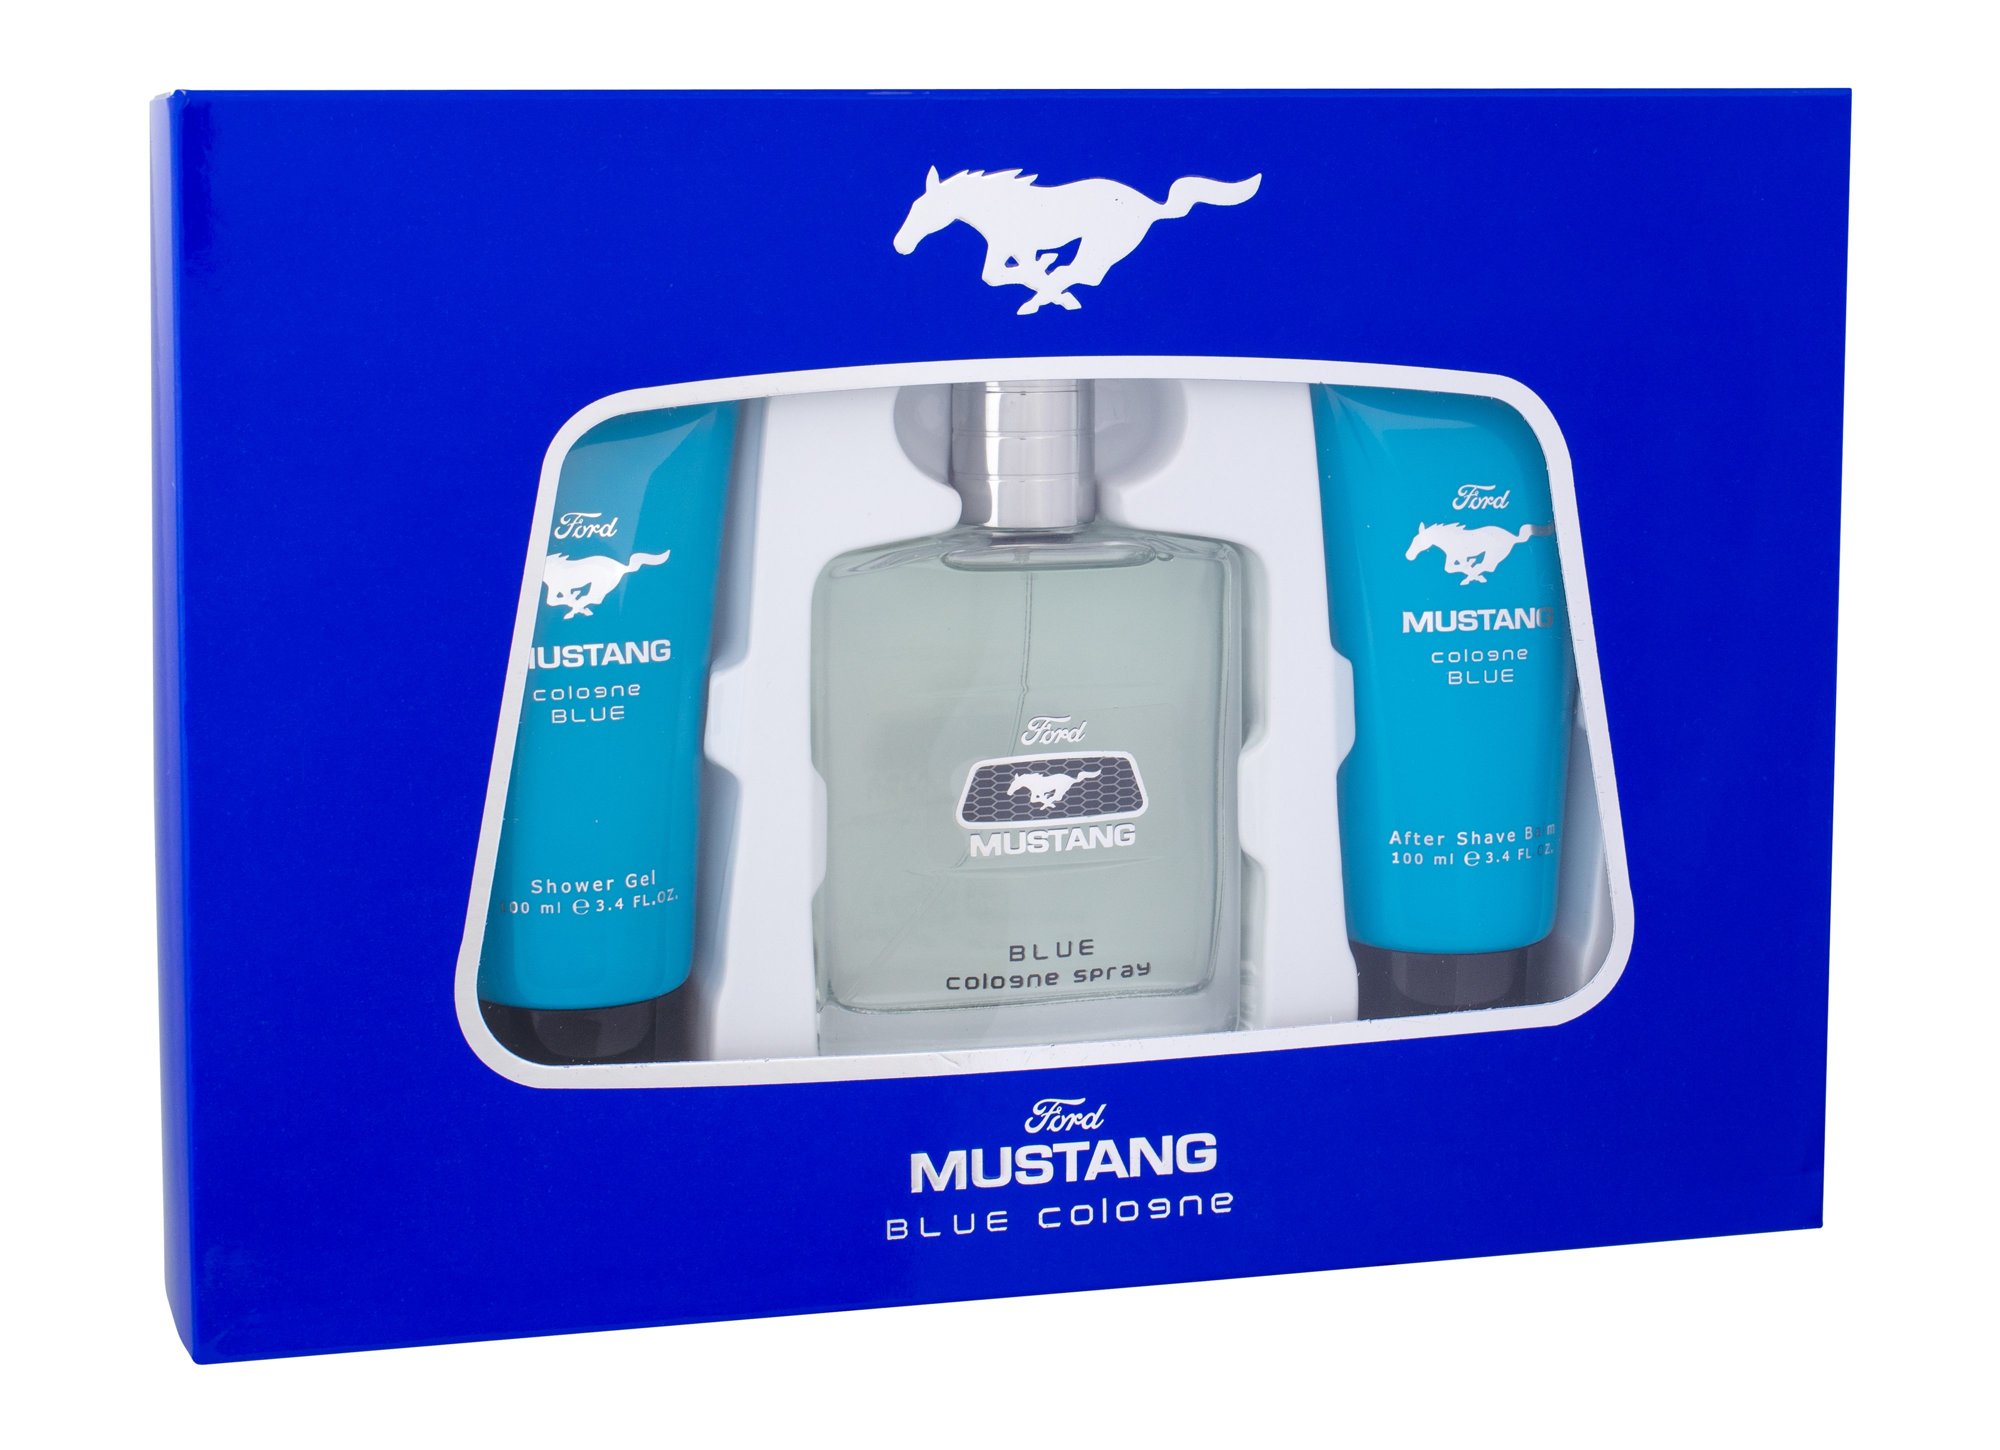 Ford Mustang Mustang Blue Cologne 100ml Edt 100 ml + Shower gel 100 ml + Aftershave balm 100 ml Kvepalai Vyrams EDT Rinkinys